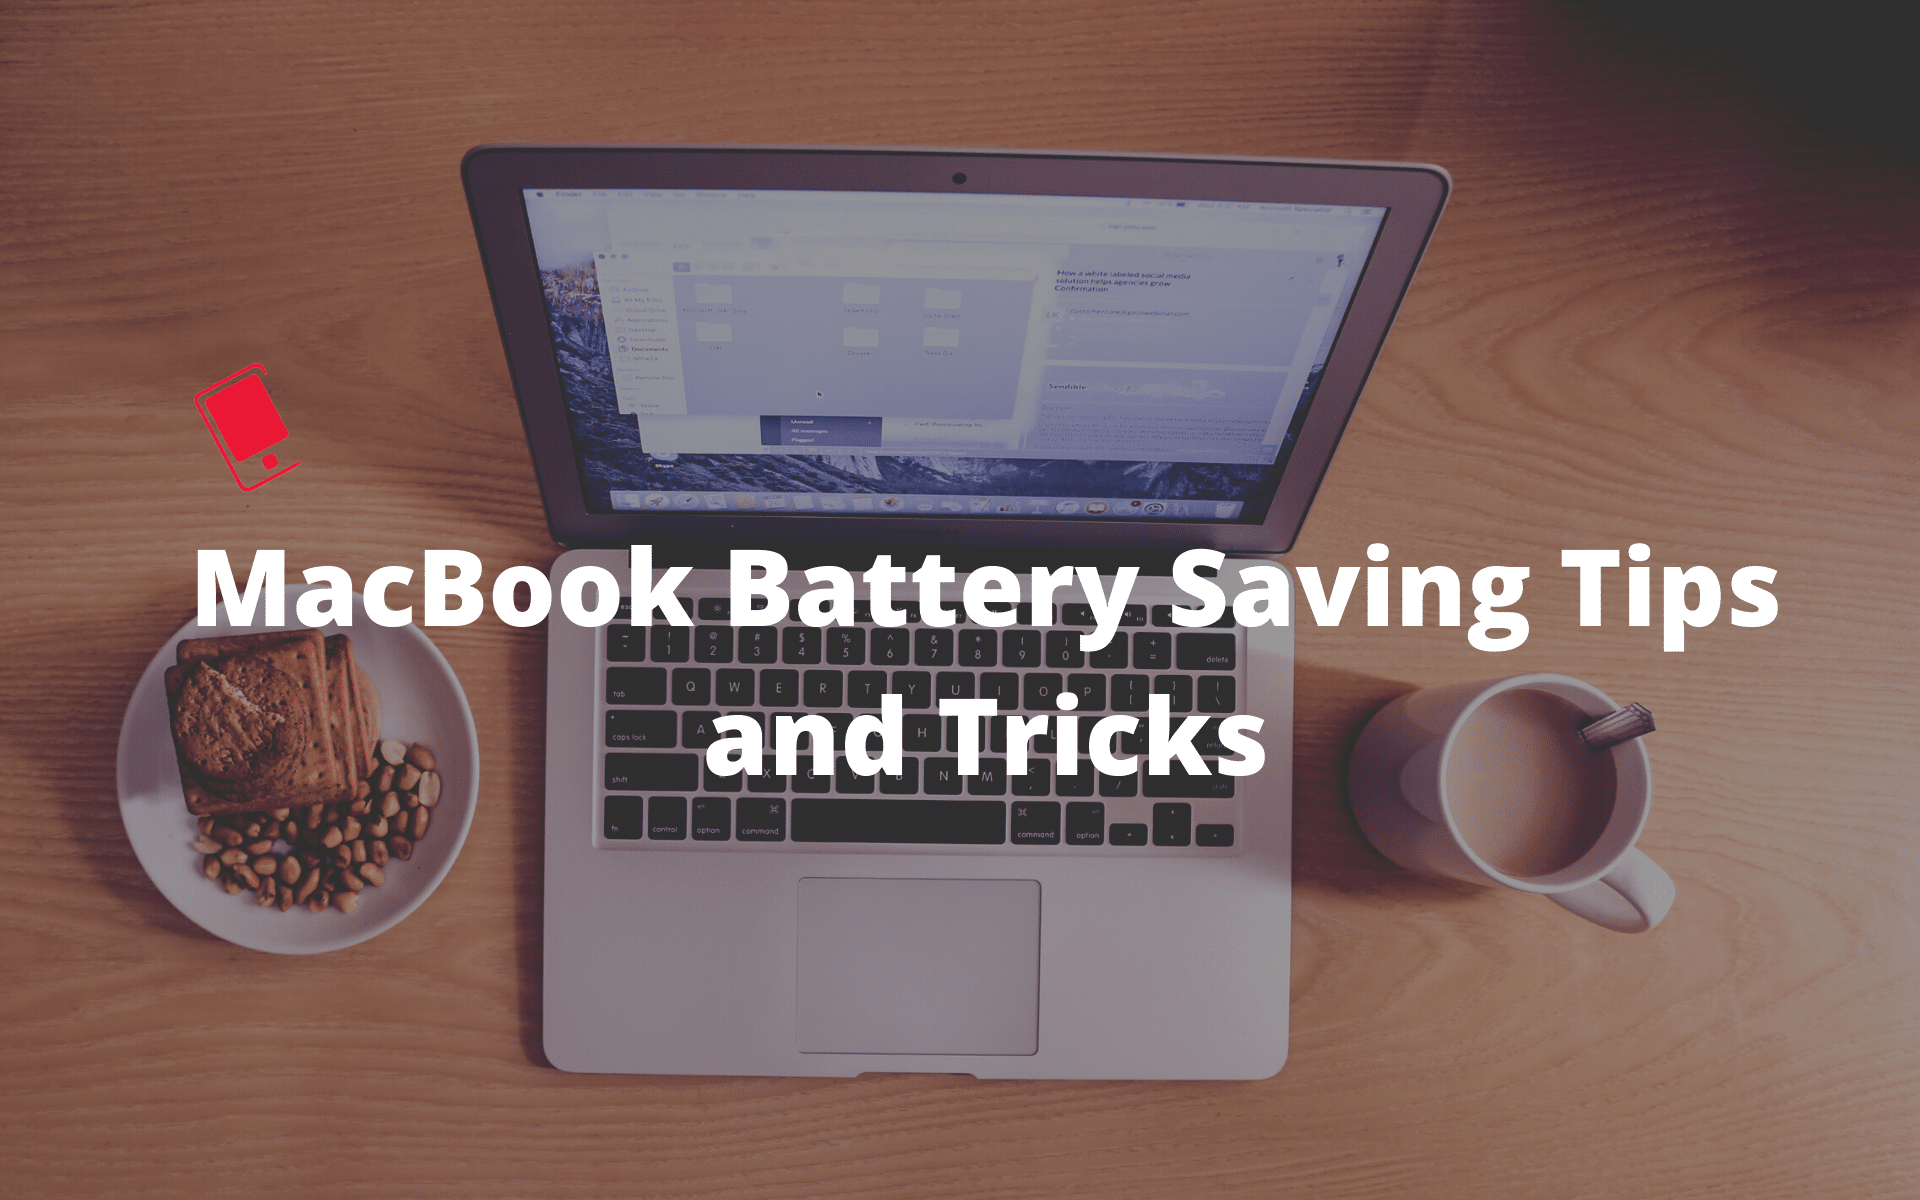 Macbook battery tips and tricks